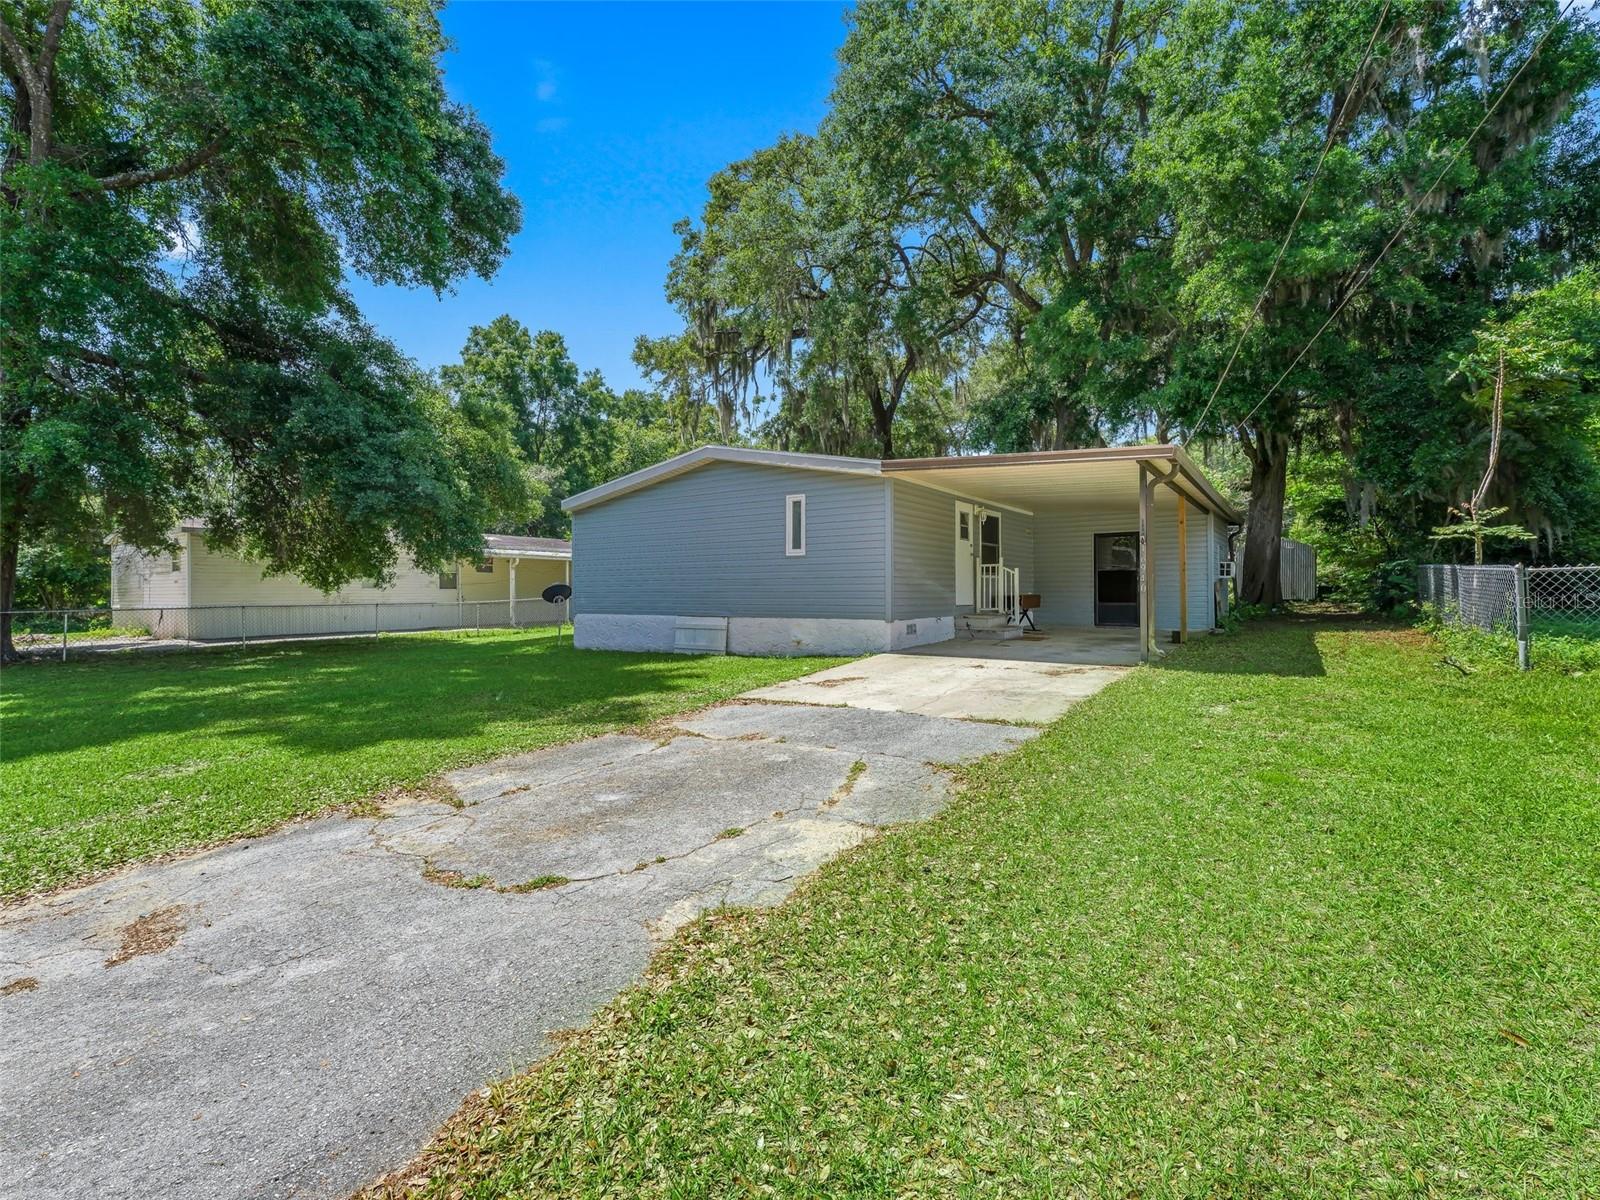 View SUMMERFIELD, FL 34491 mobile home